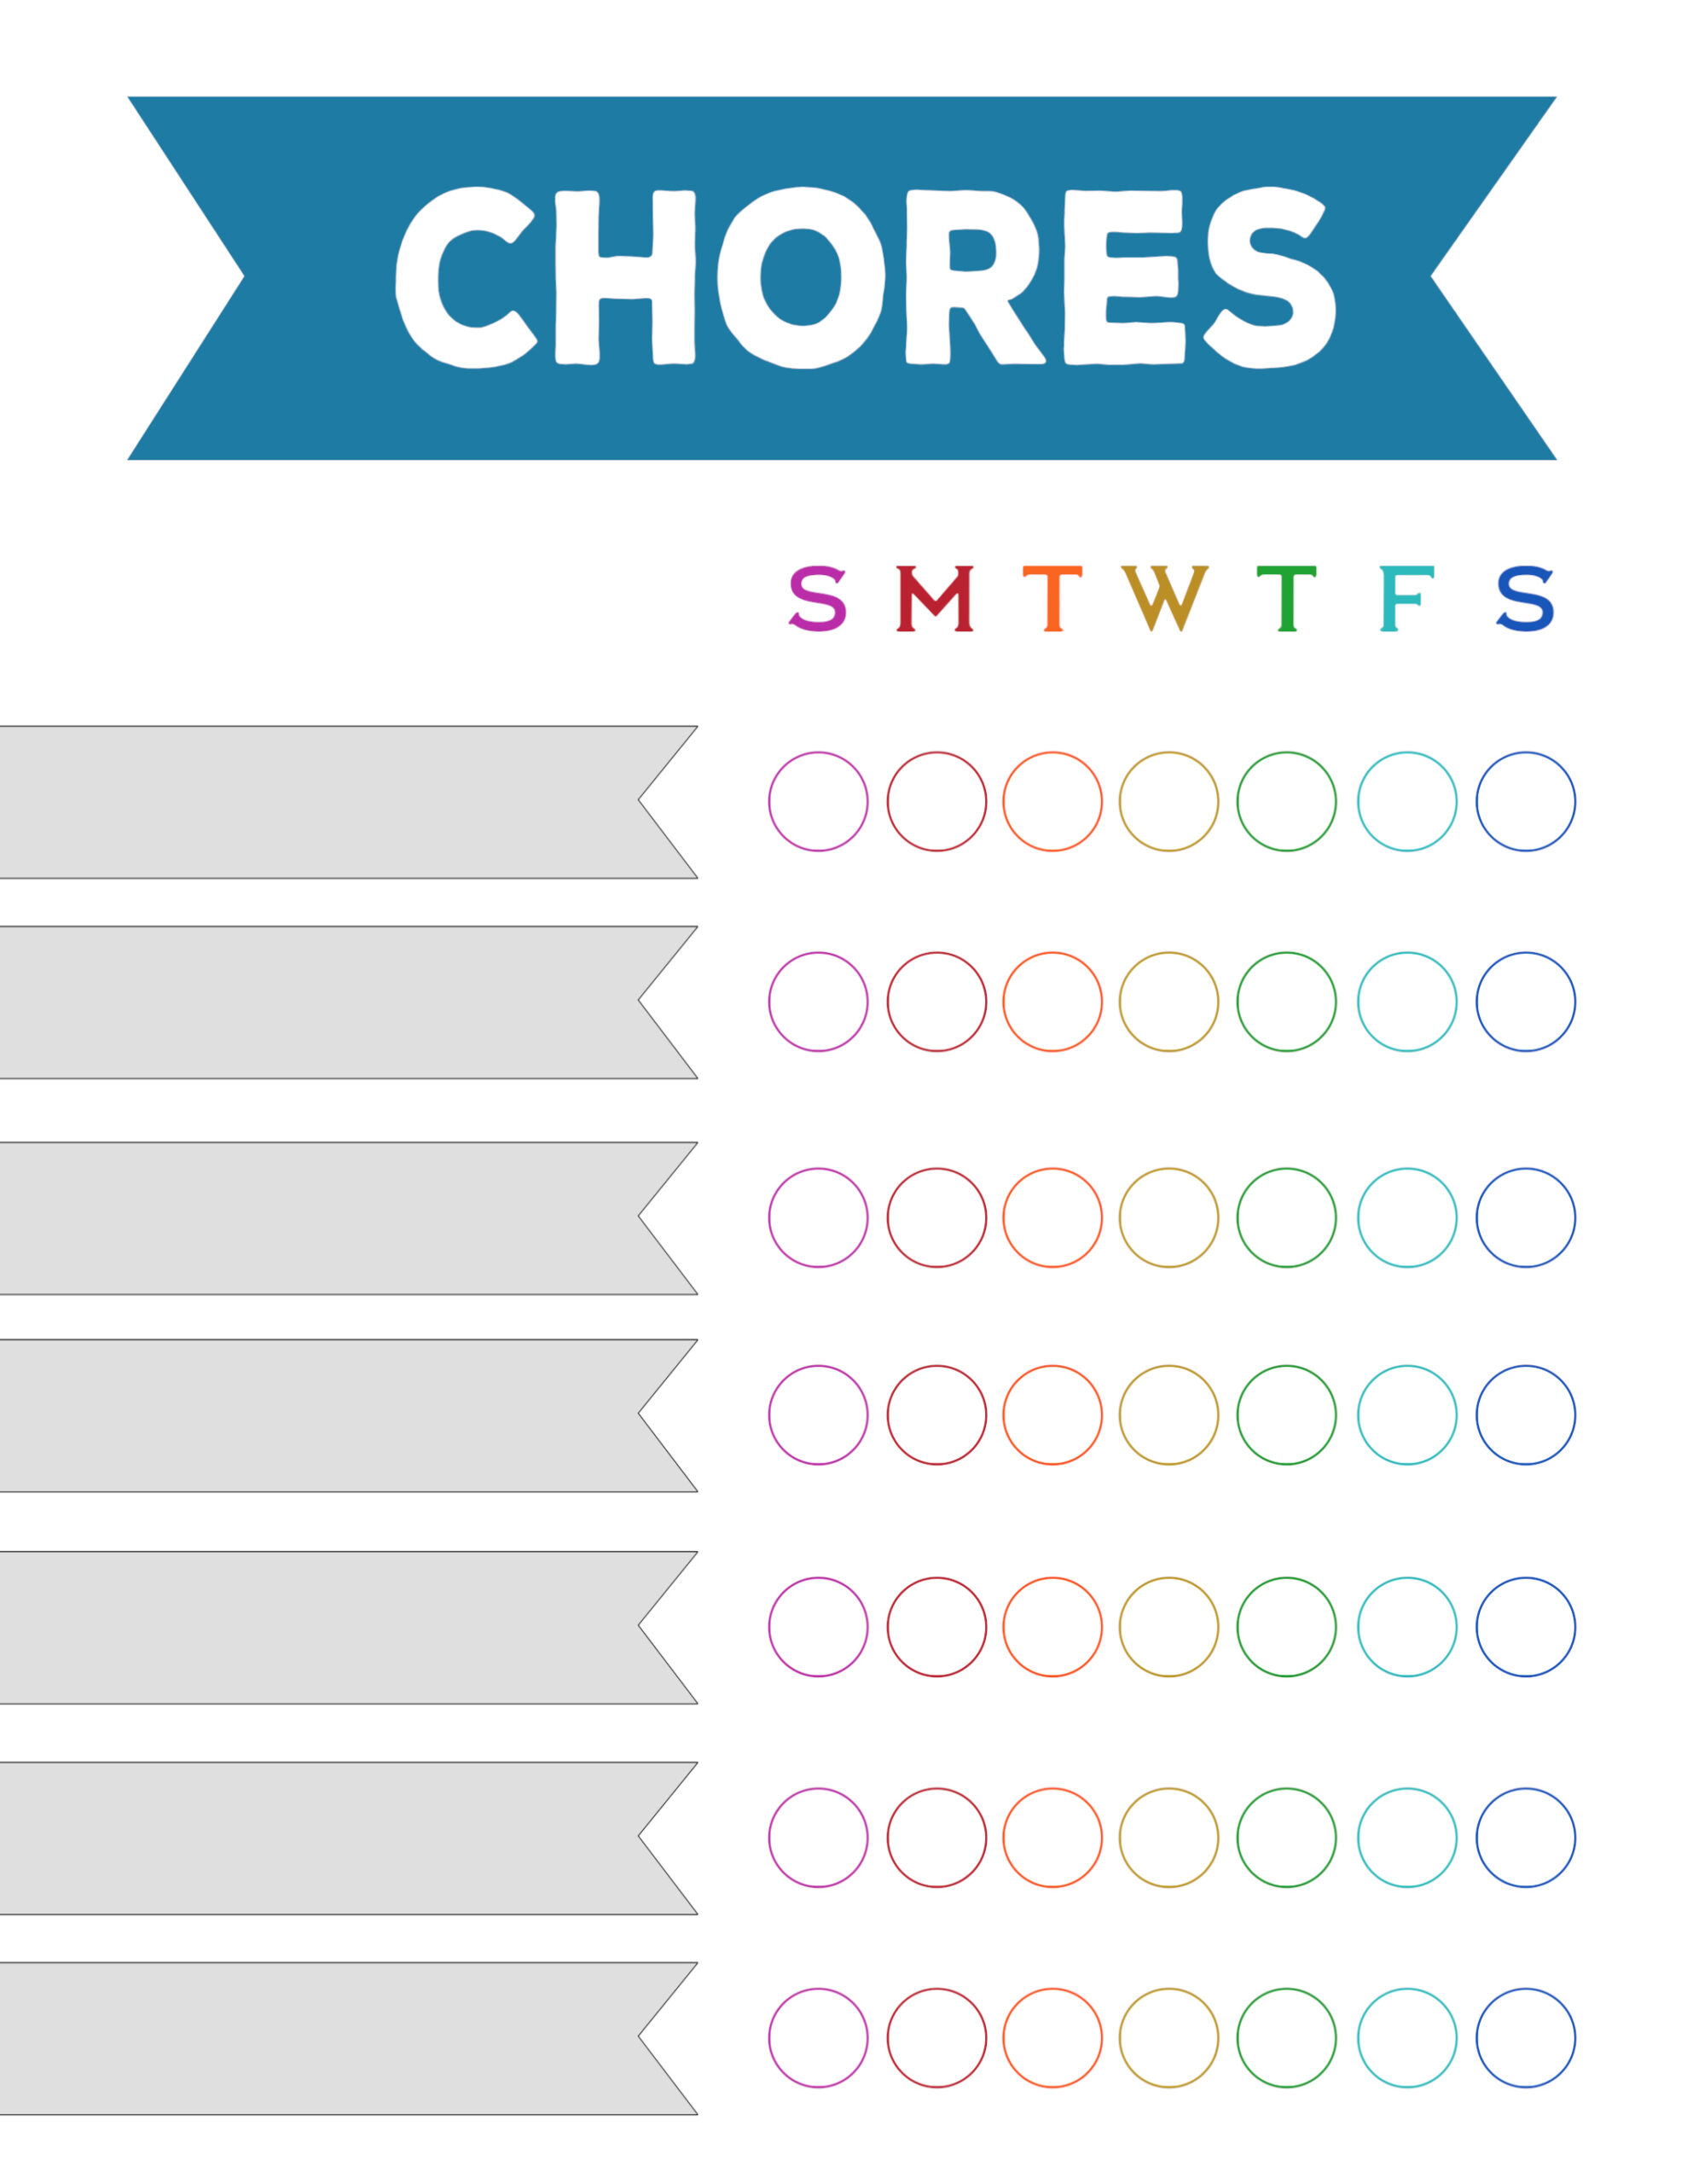 Free Printable Weekly Chore Charts - Paper Trail Design intended for Charts Free Printable